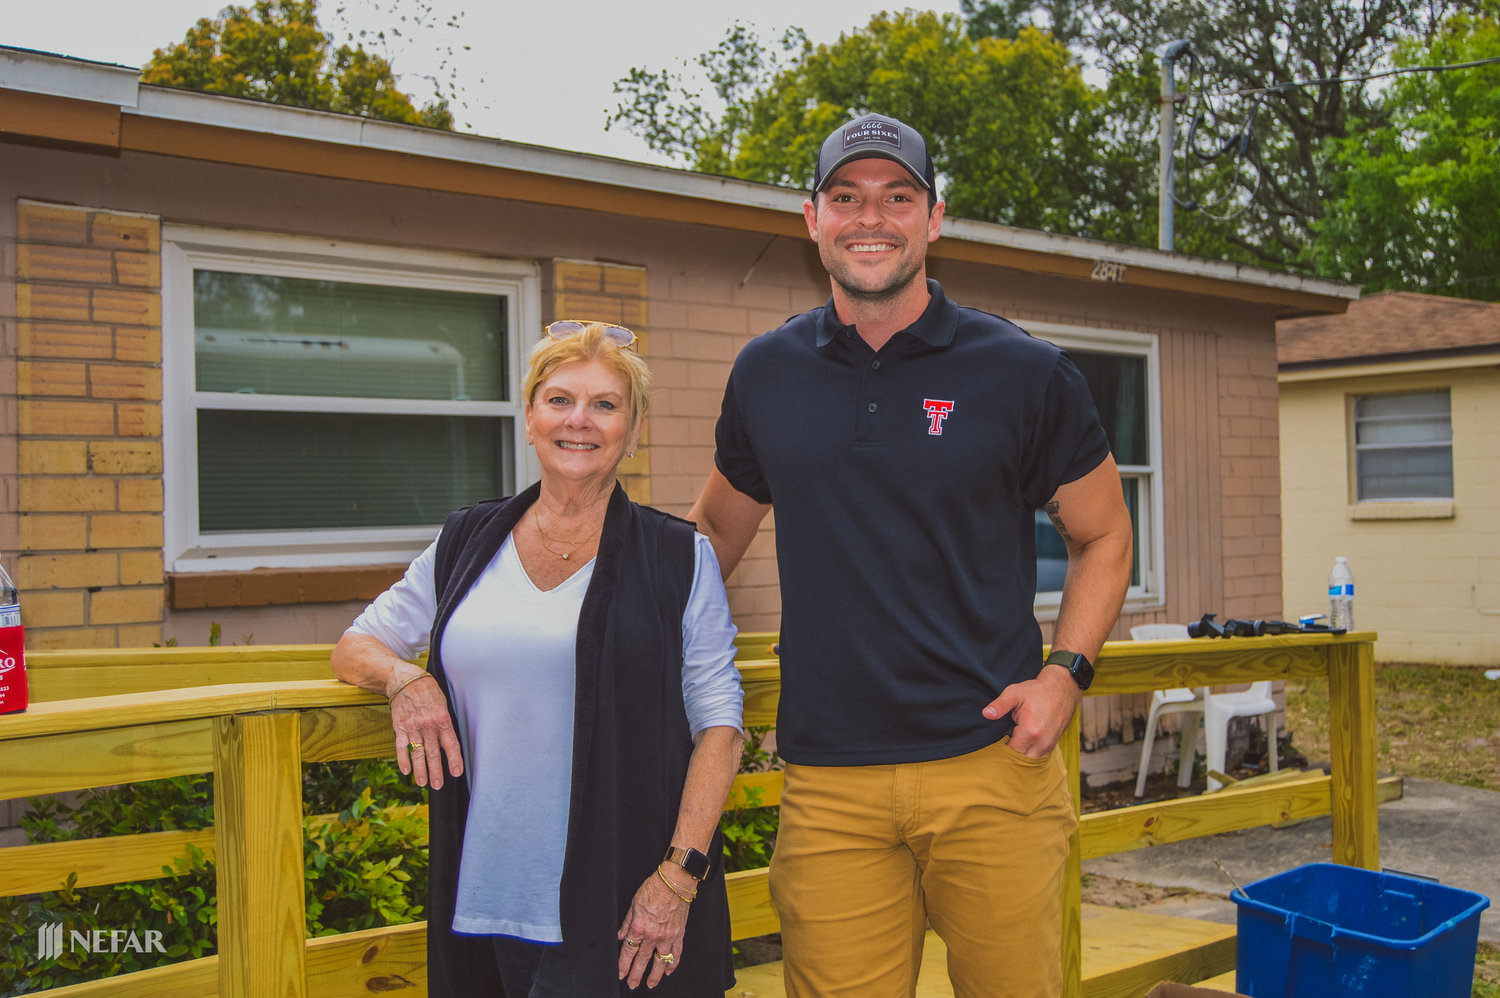 NEFAR Realtors Anita Vining and Clay Hall of Berkshire Hathaway HomeServices in San Marco participated in the wheelchair ramp building event sponsored by the Northeast Florida Association of Realtors March 23.